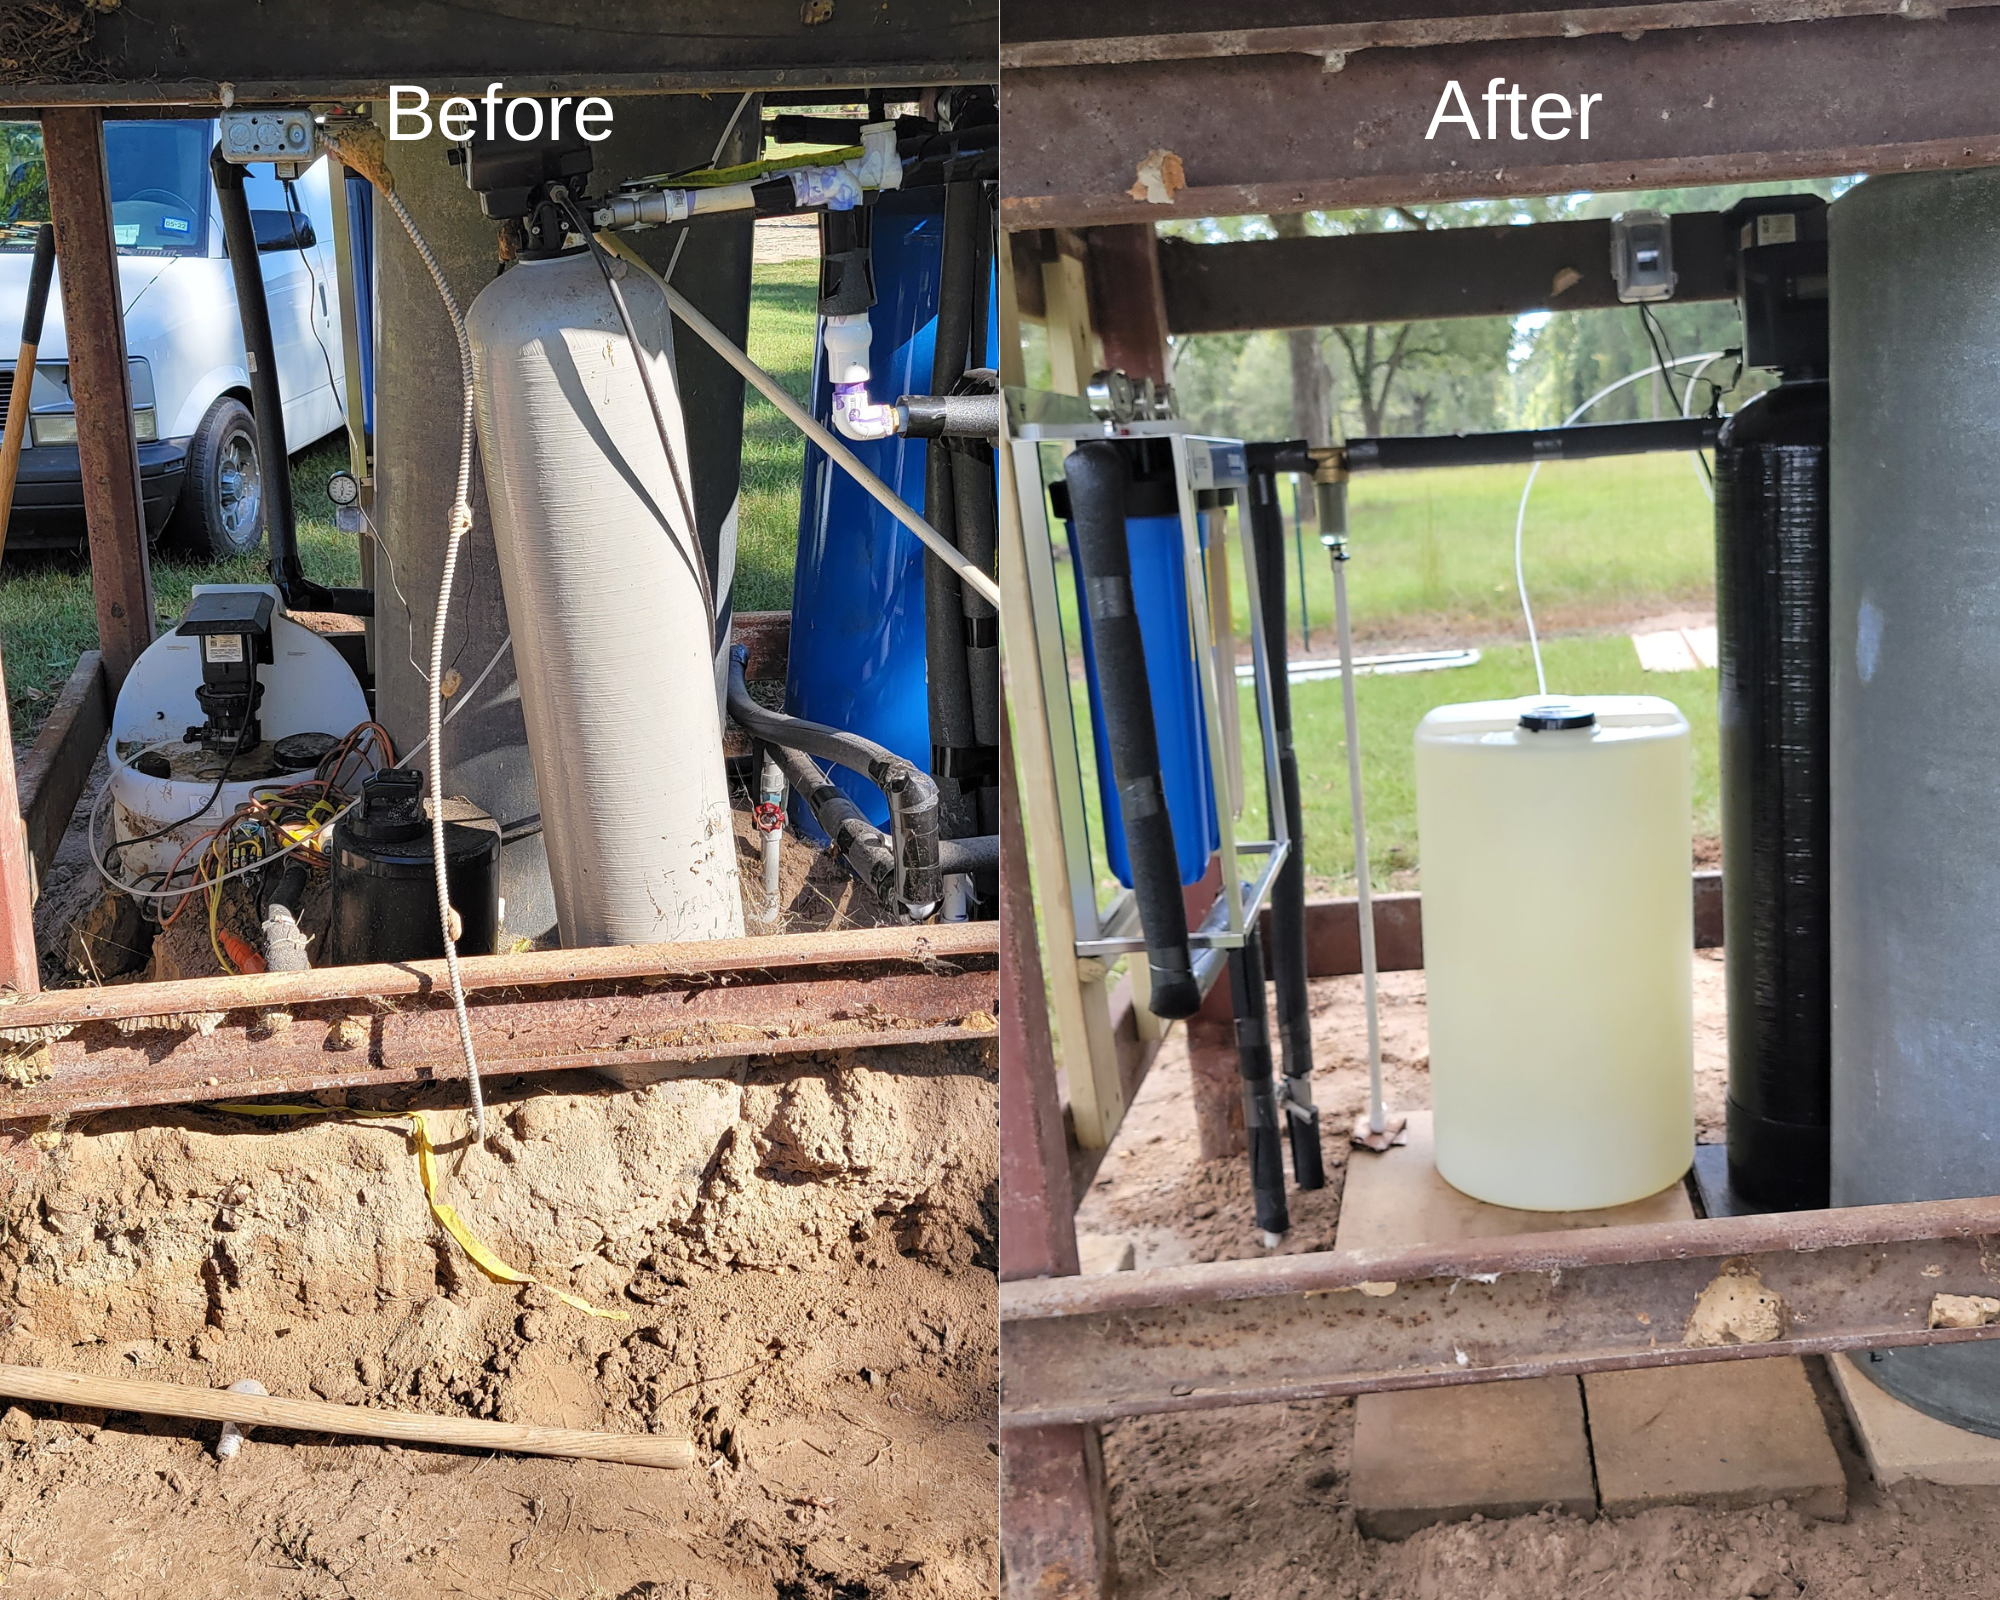 Iron Filter Upgrade Before and After.